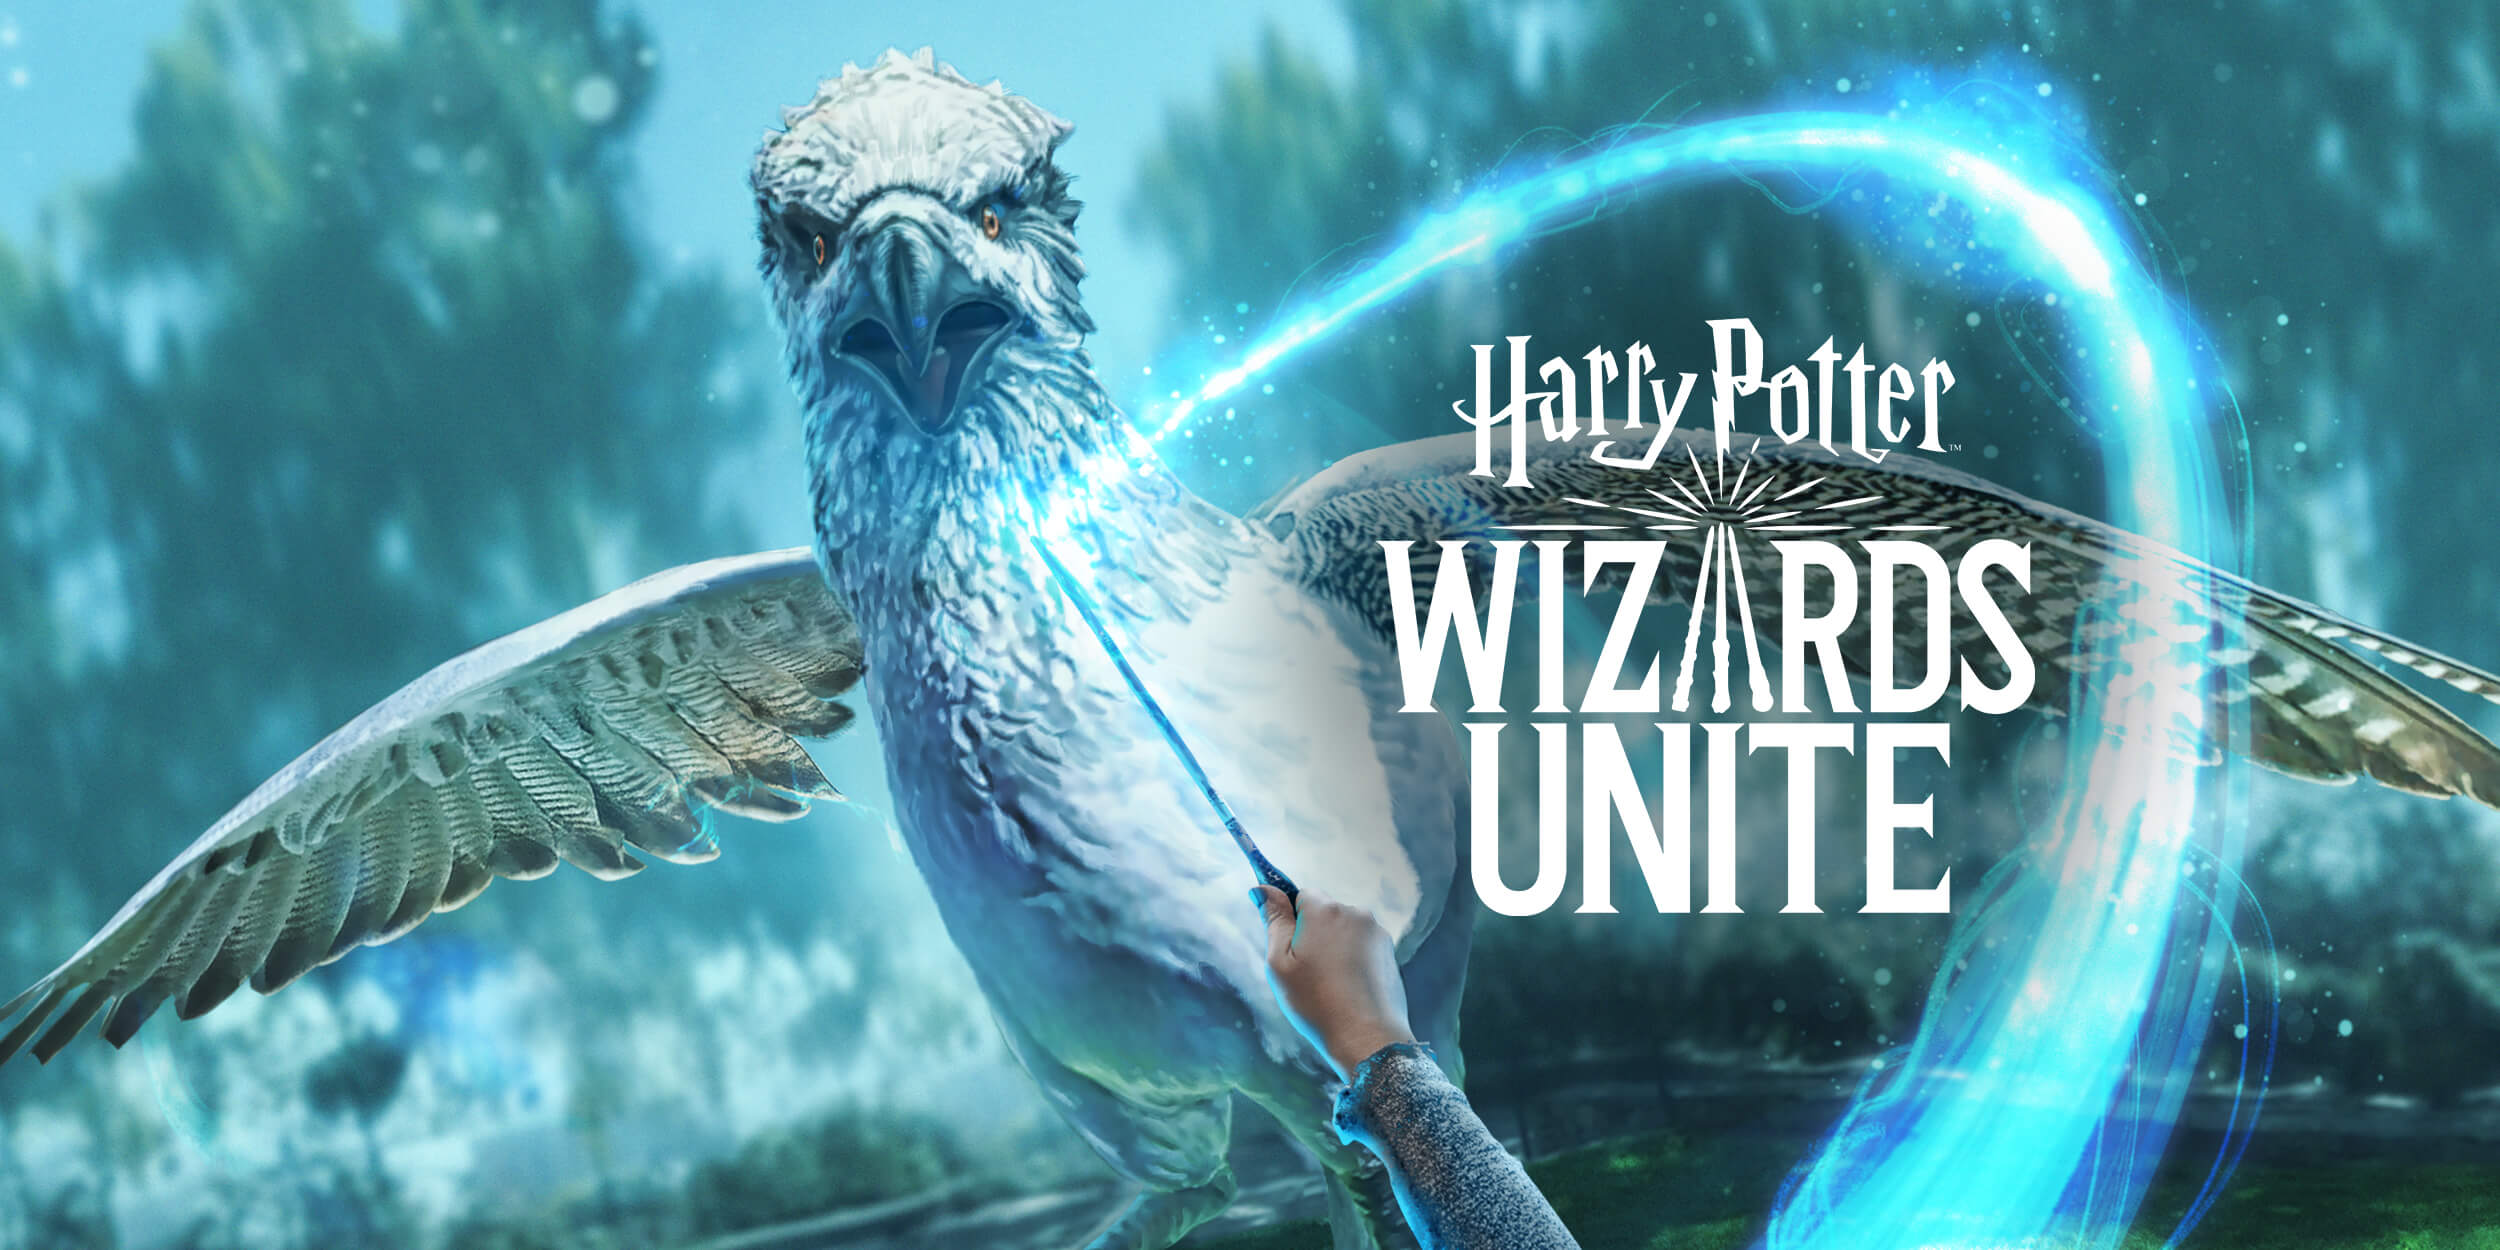 niantic labs stock ipo which companies benefit harry potter wizards unite release